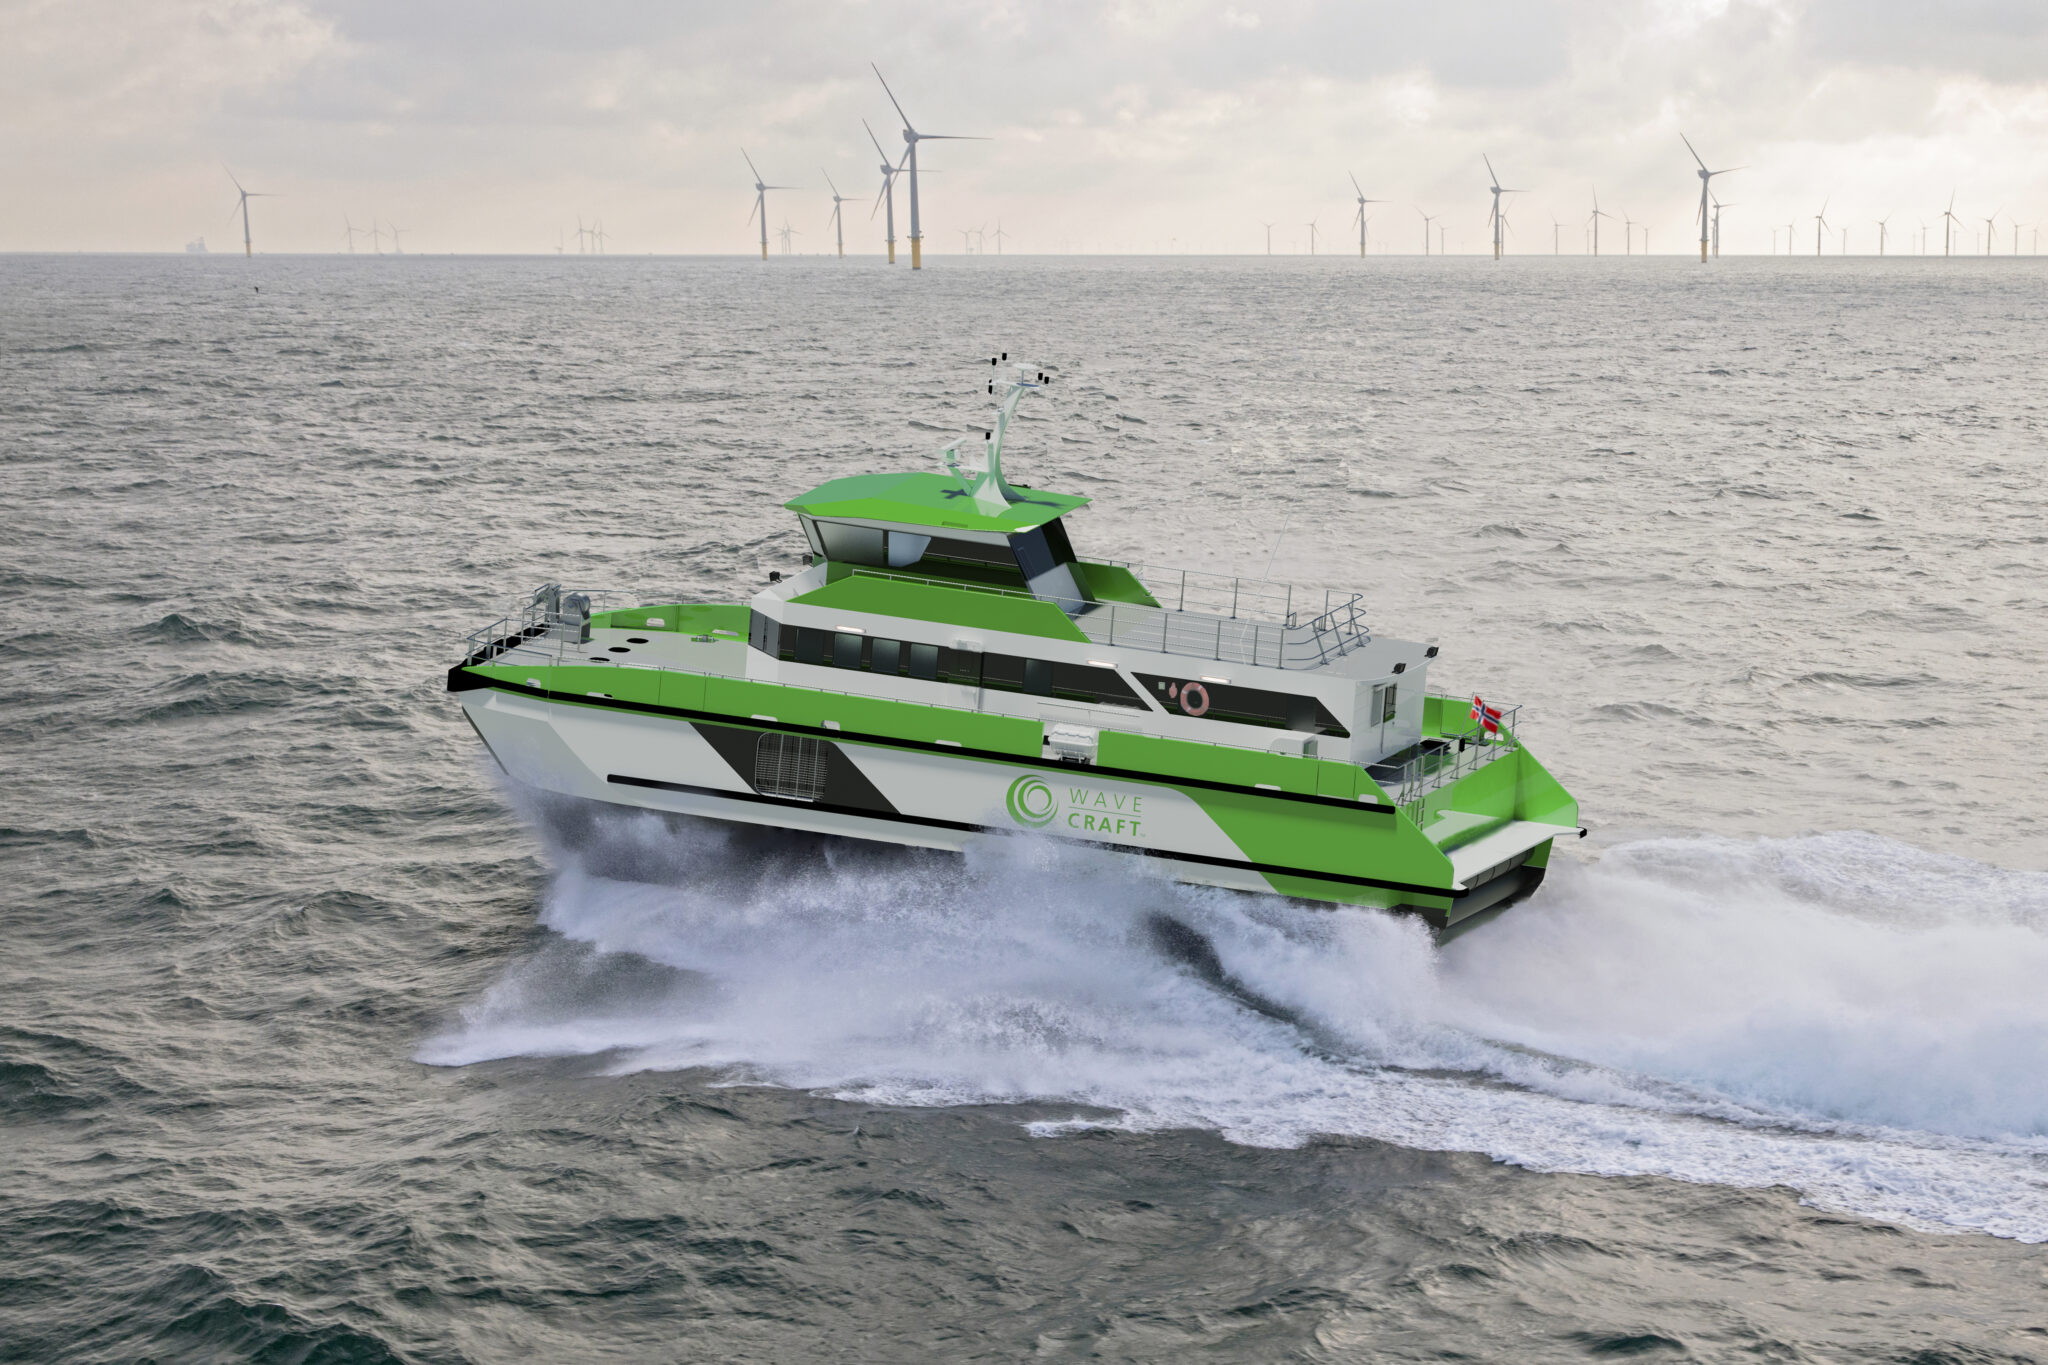 •	Hydrogen-Powered “High-Speed Vessel of the Future” Will Hit 40 MPH With Zero Emissions